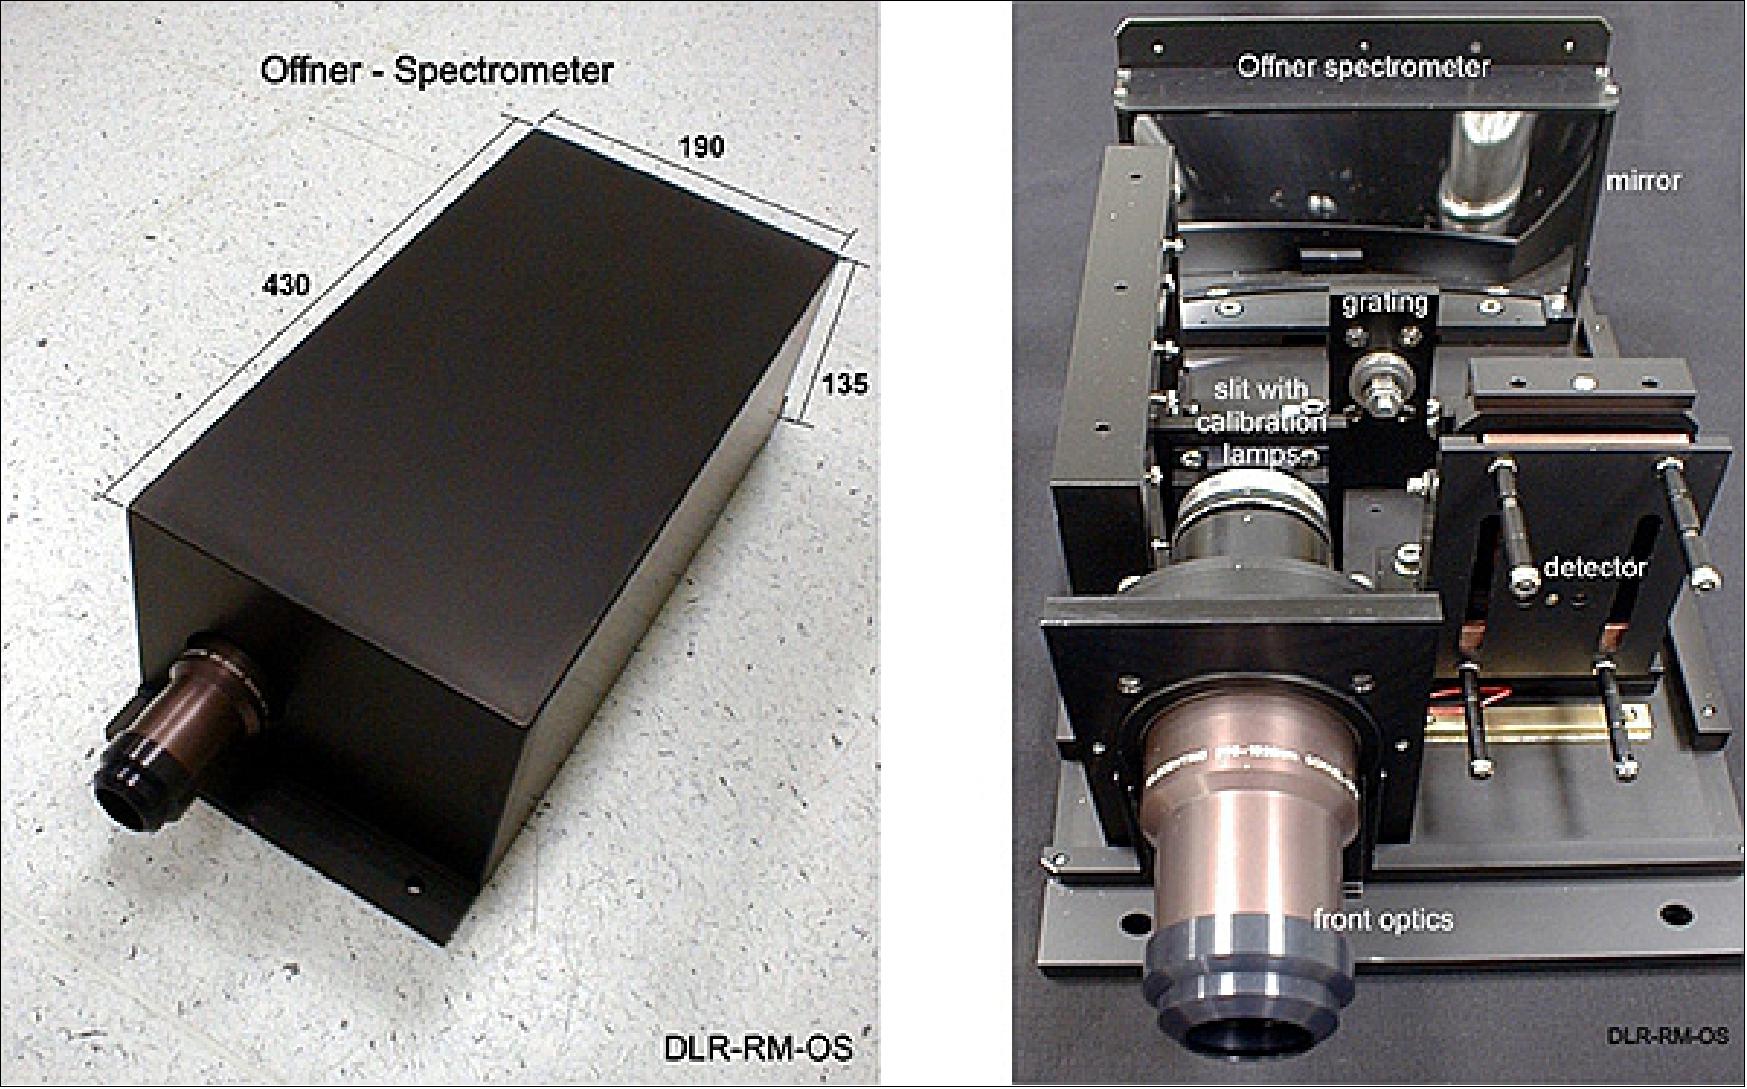 Figure 8: Photos of the Offner Spectrometer (image credit: DLR)